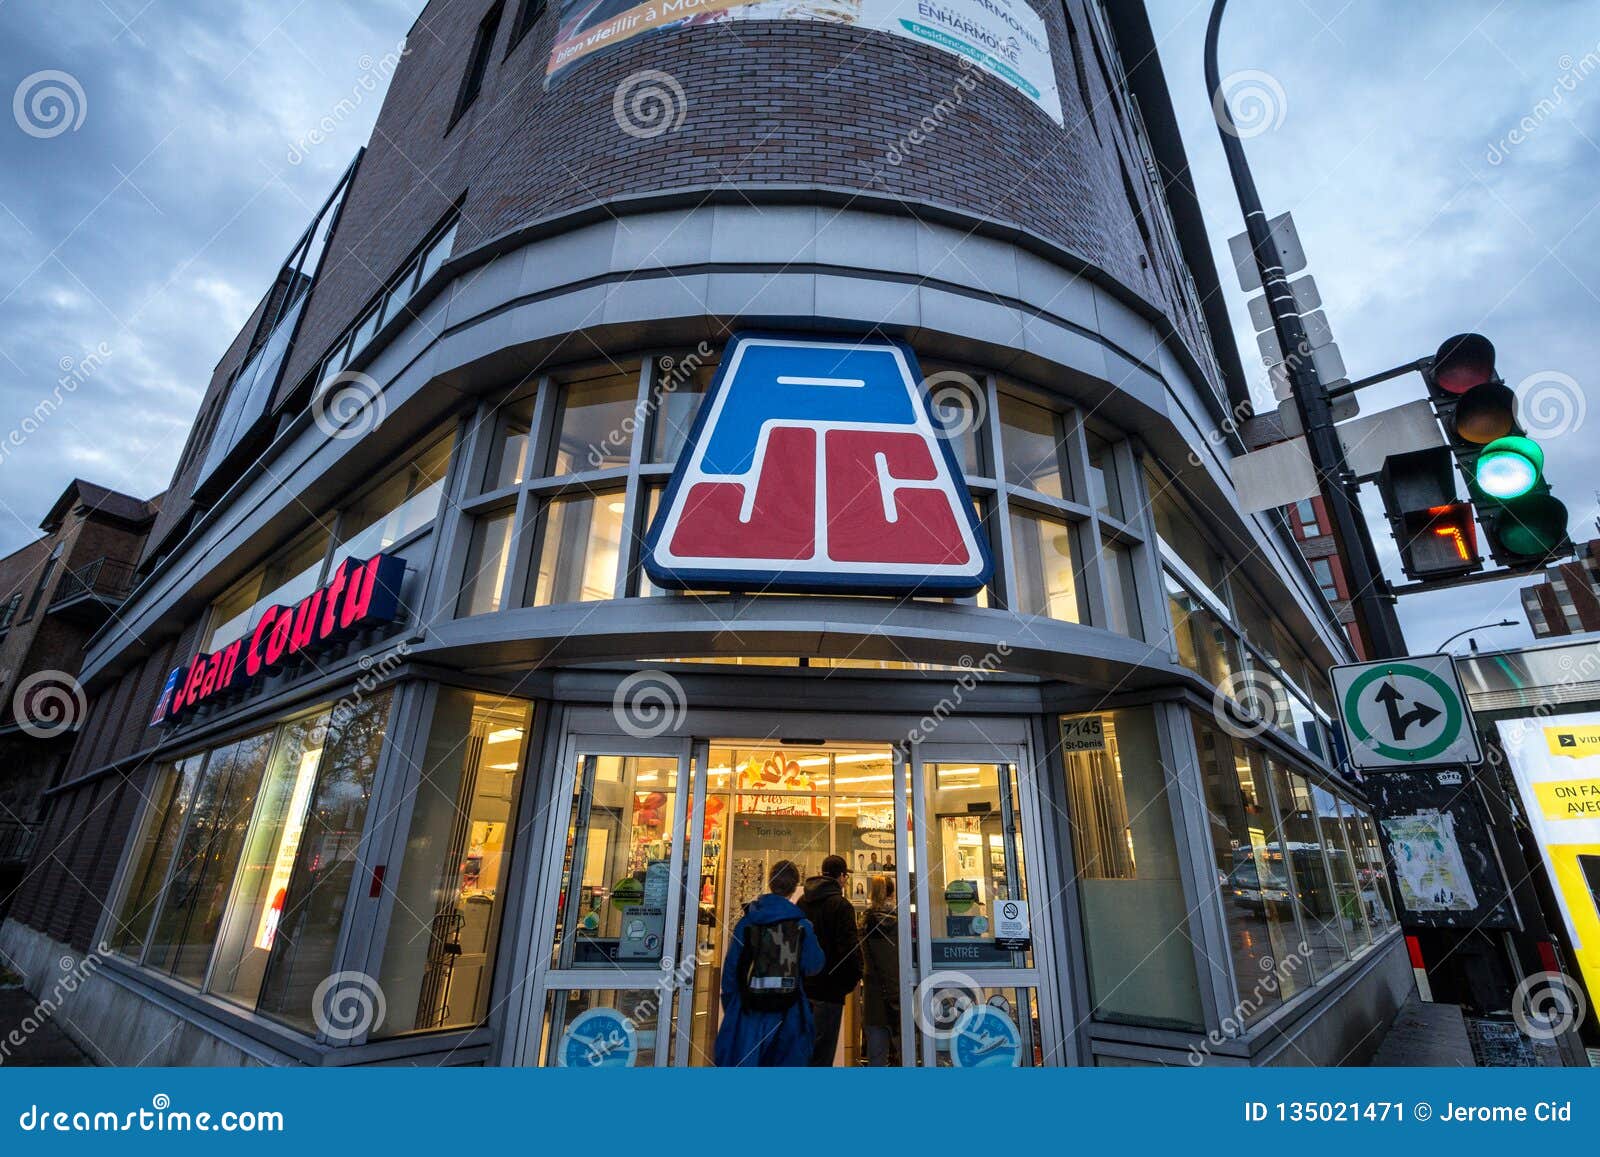 https://thumbs.dreamstime.com/z/pharmacie-jean-coutu-logo-their-main-shop-montreal-also-known-as-pjc-jean-coutu-group-chain-pharmacies-montreal-135021471.jpg